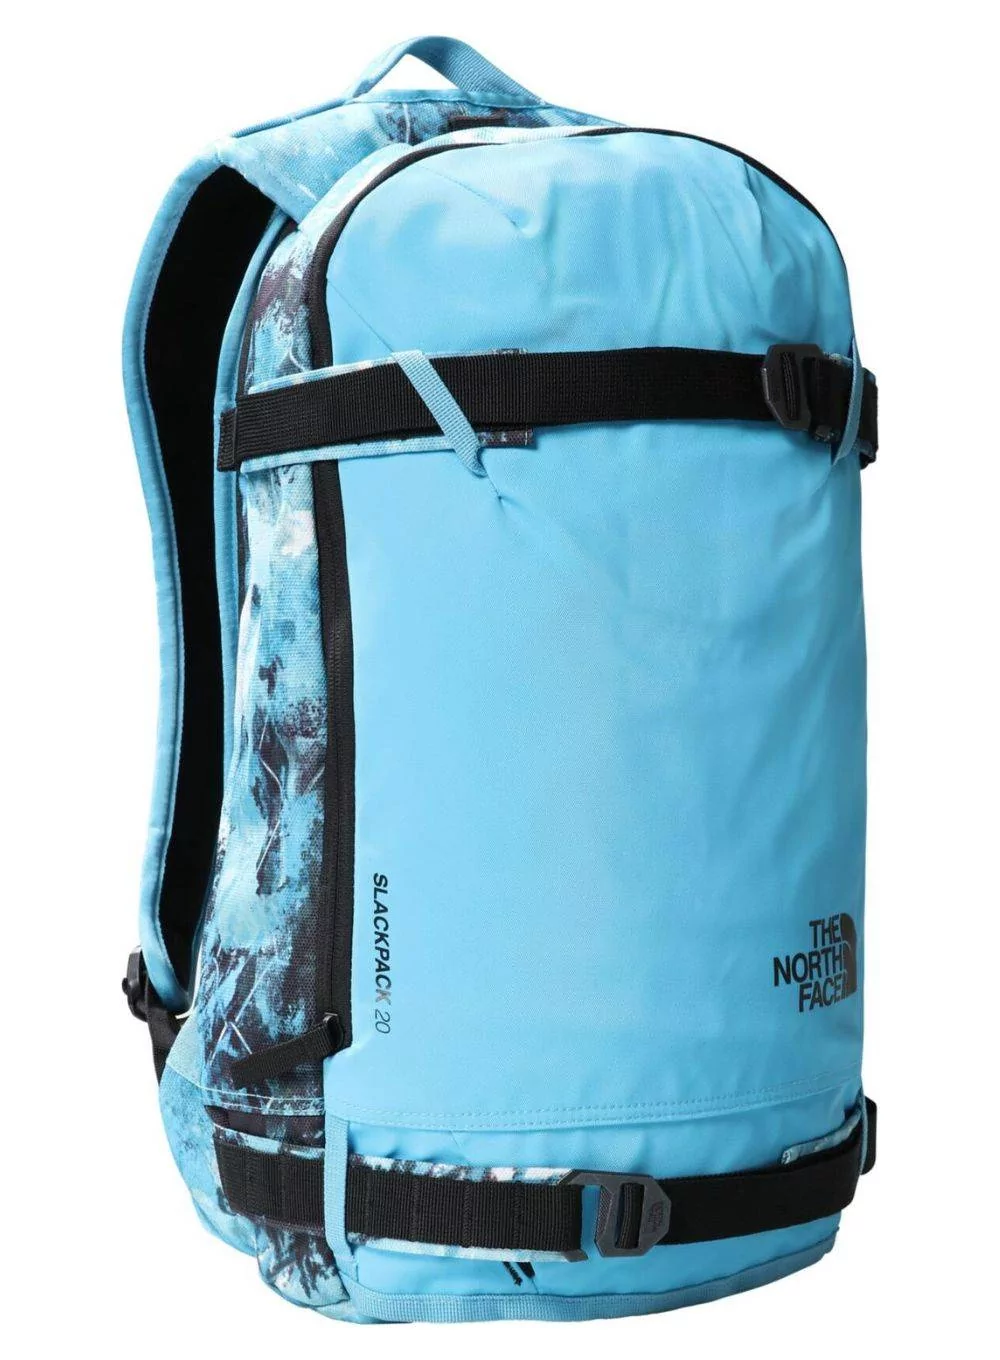 Plecak sportowy The North Face Slackpack 2.0 - norse blue / norse blue